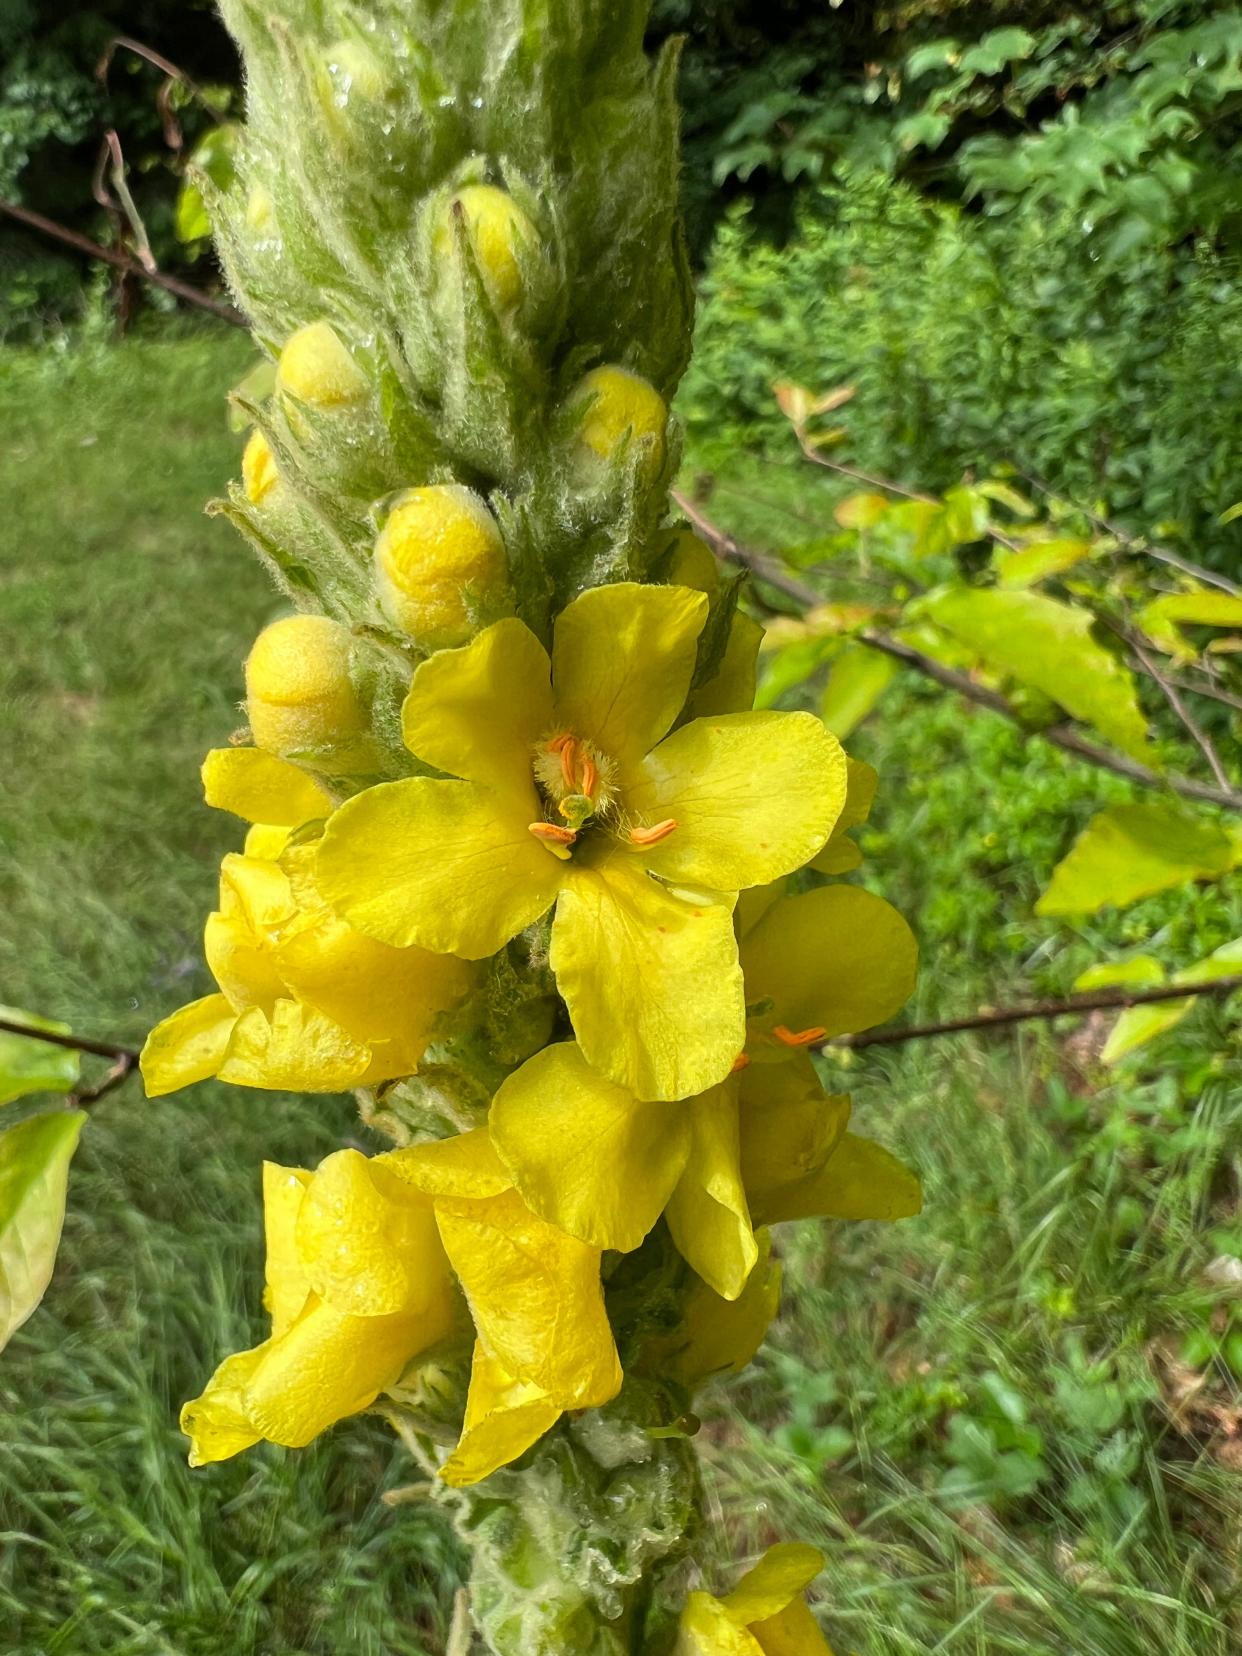 Mullein is a biennial; one year it produces a big rosette of leaves at the base, and the next year it produces a tall flower stalk.